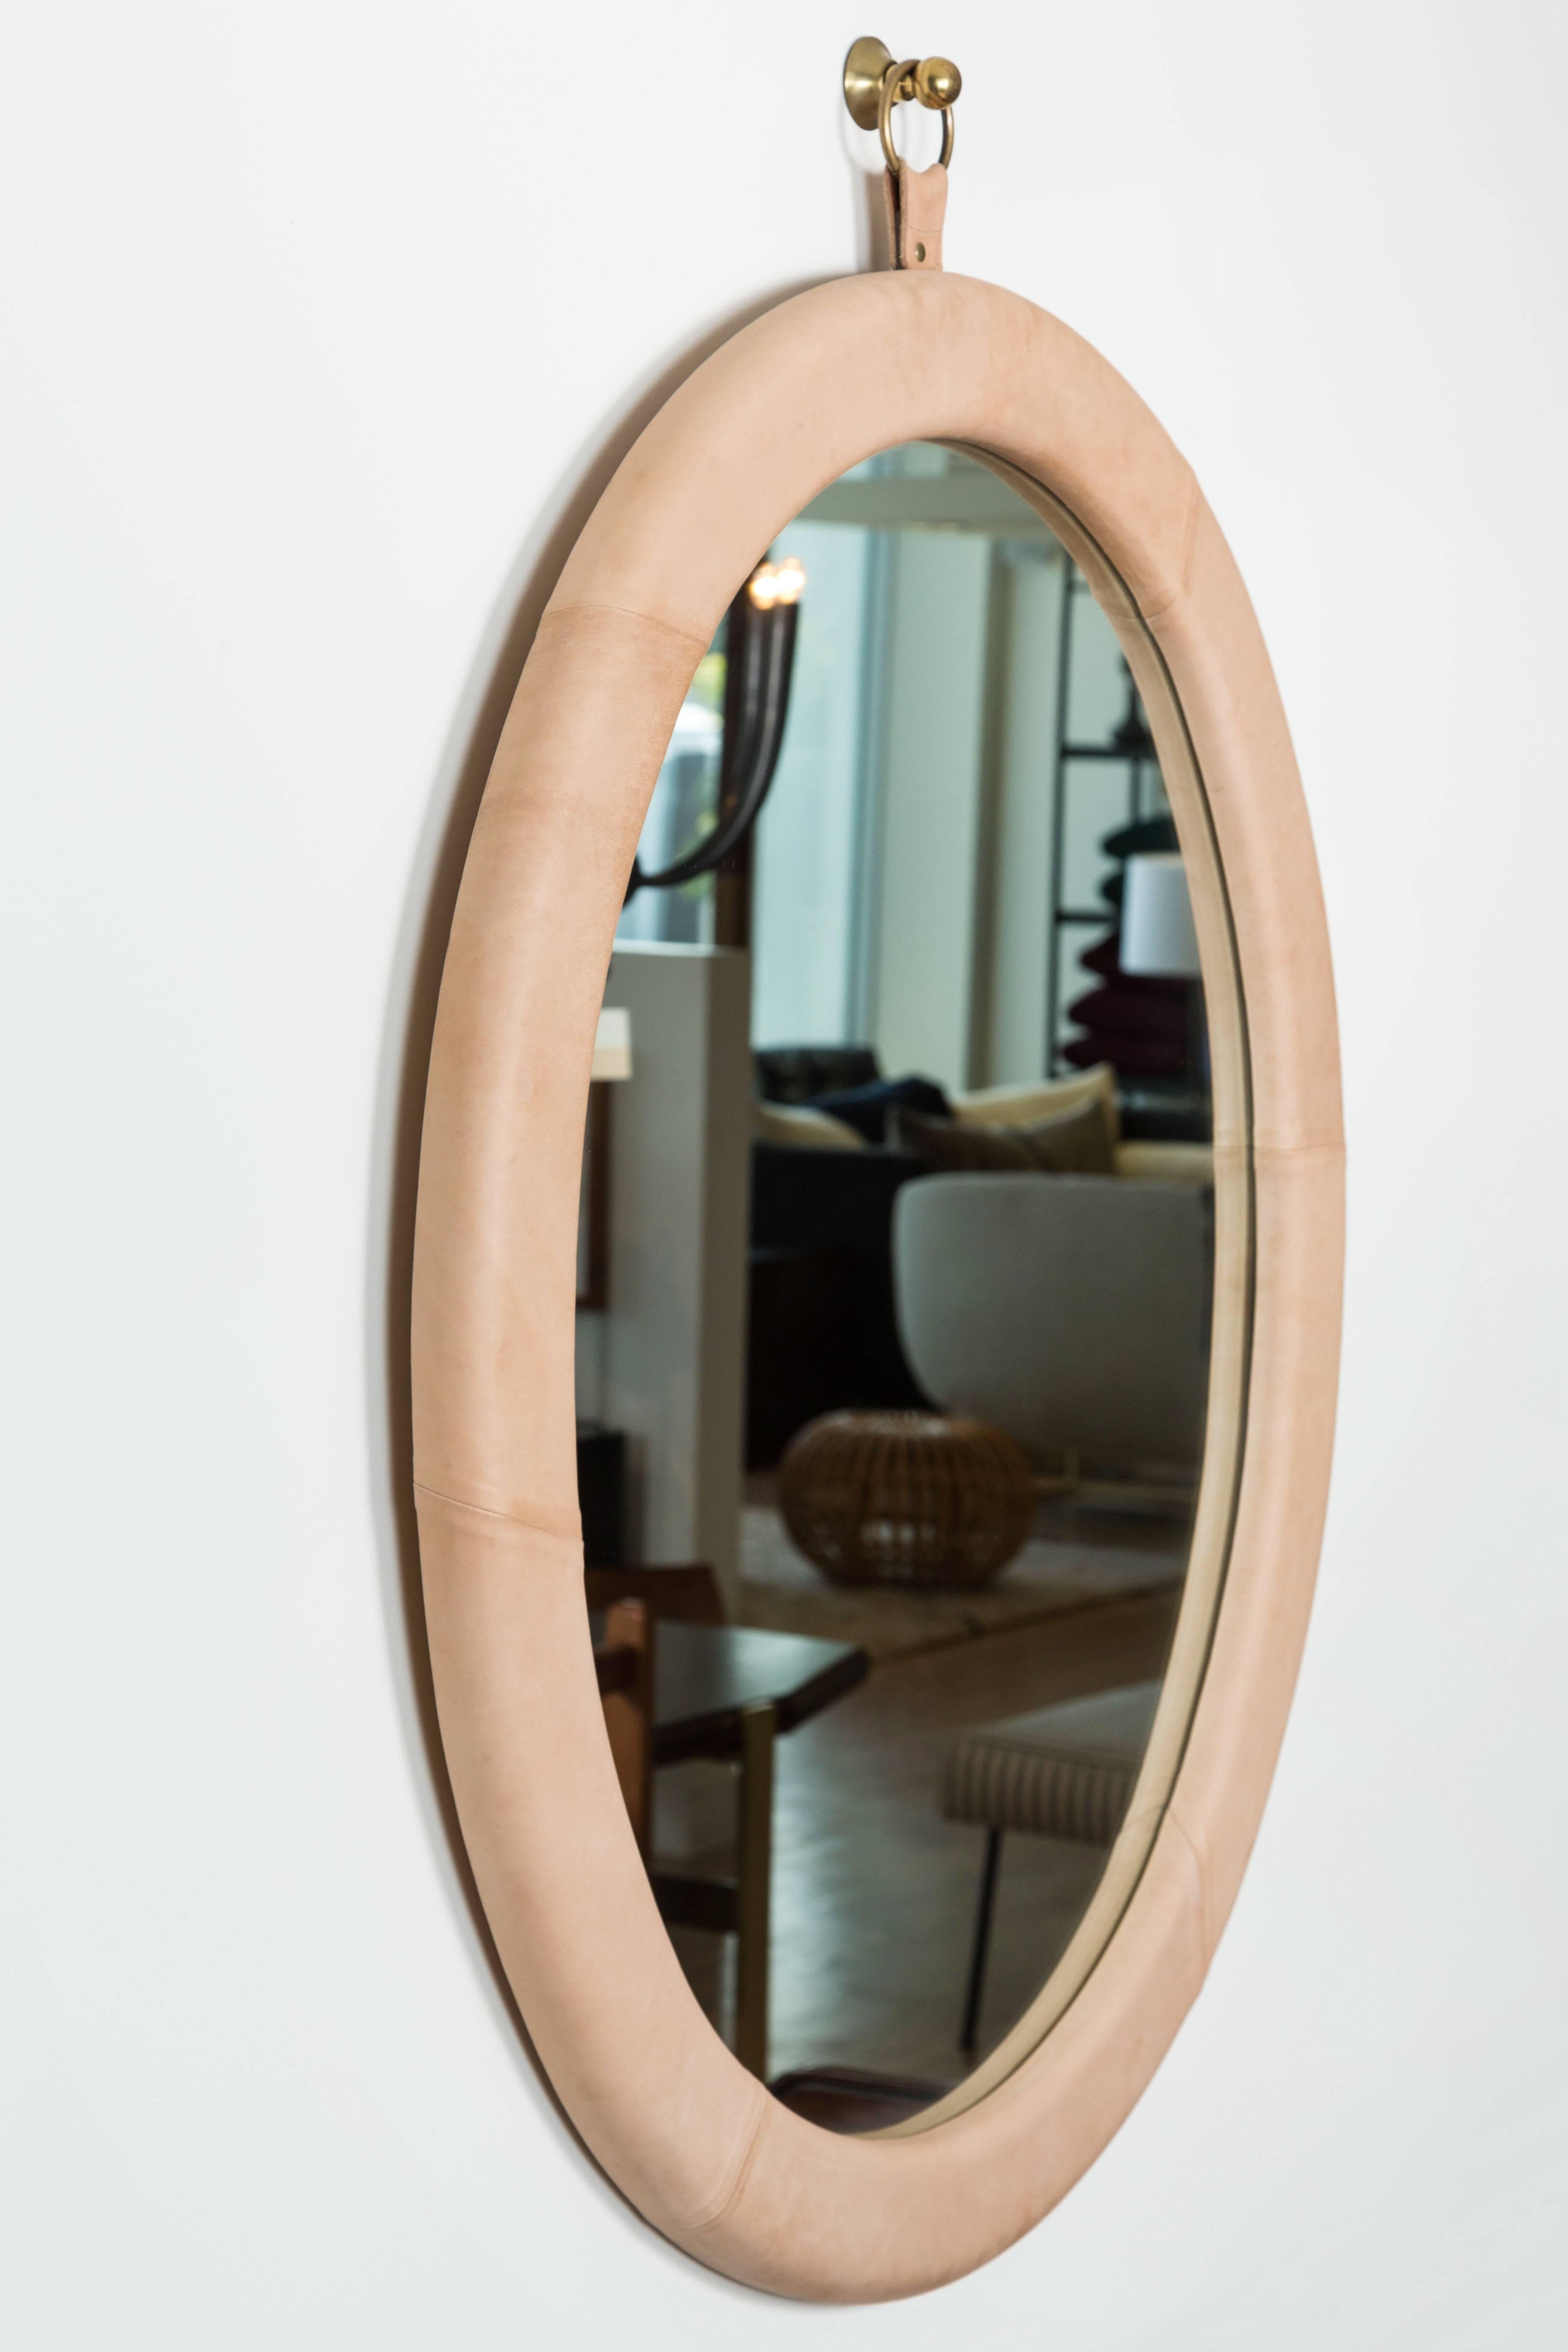 Leather oval mirror by Jason Koharik for Collected By.